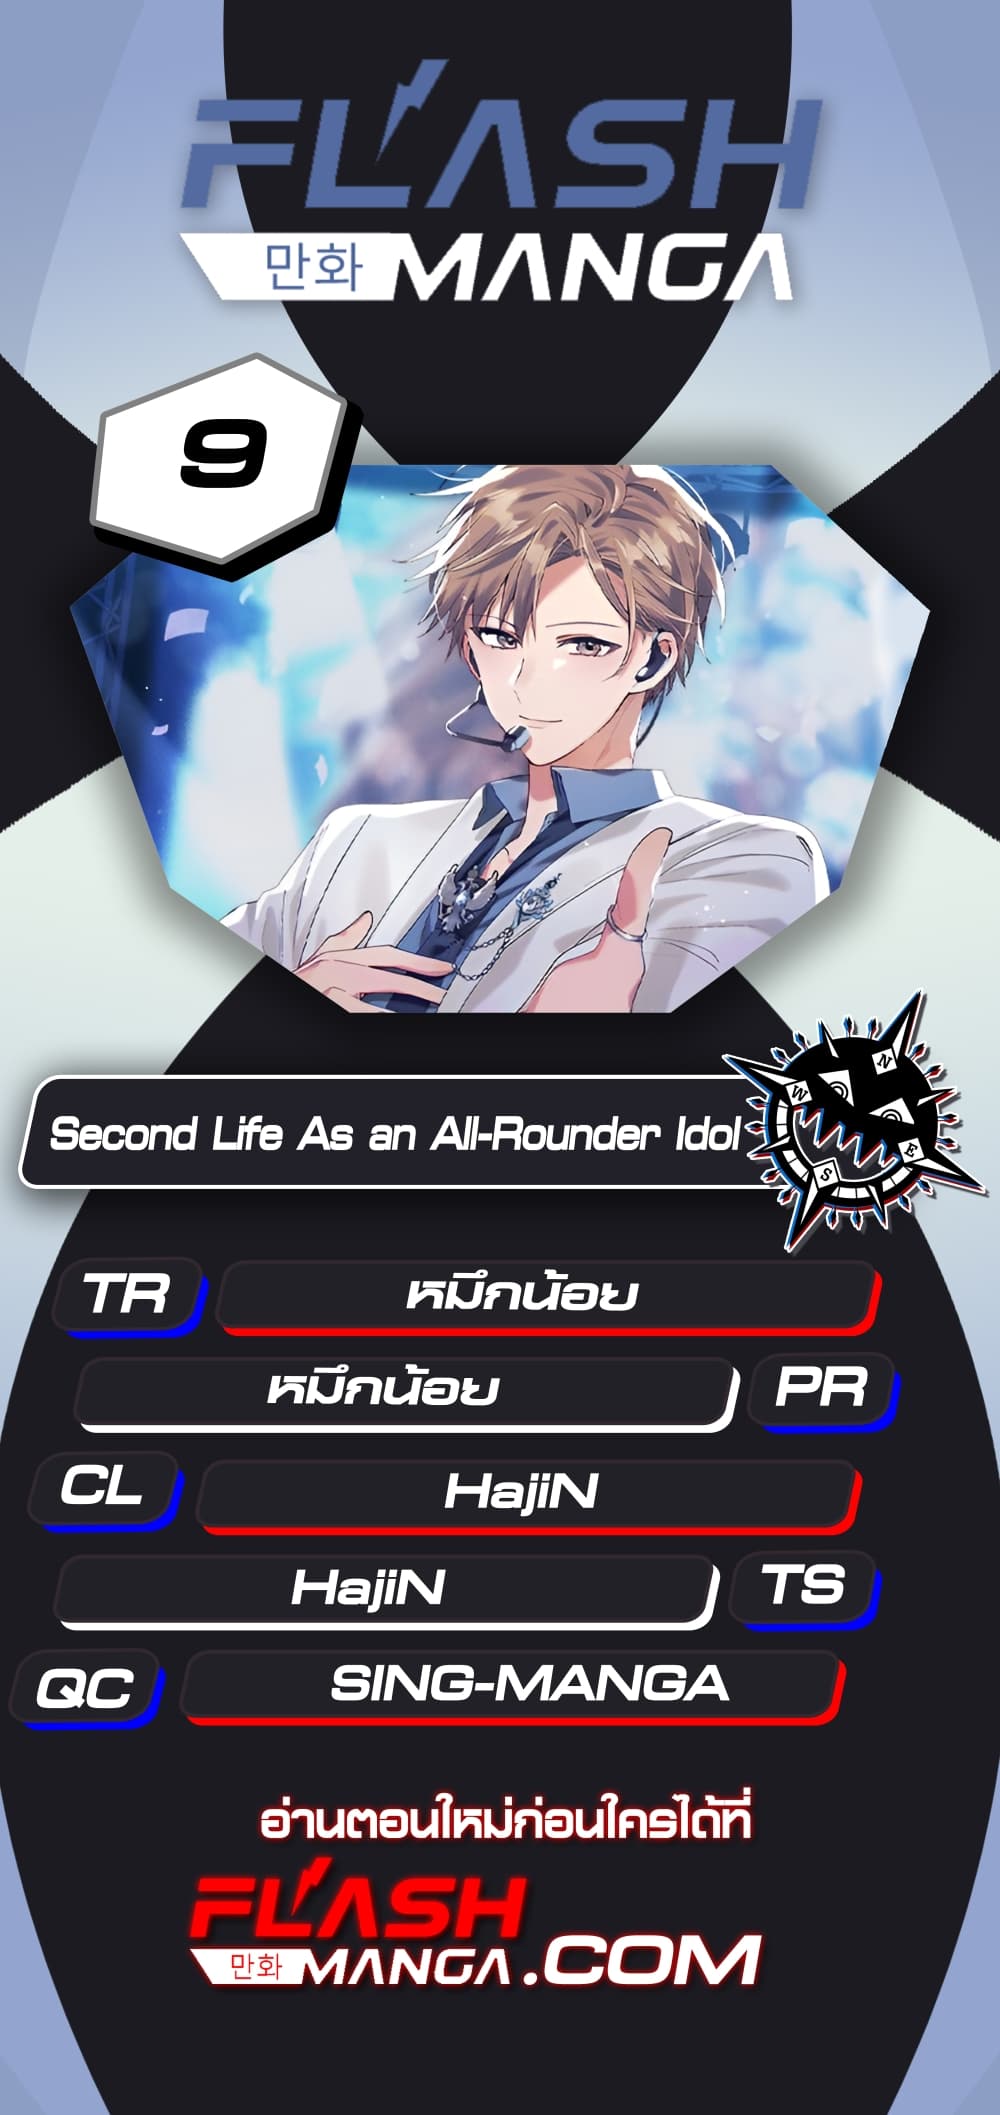 The Second Life of an All-Rounder Idol 9-9